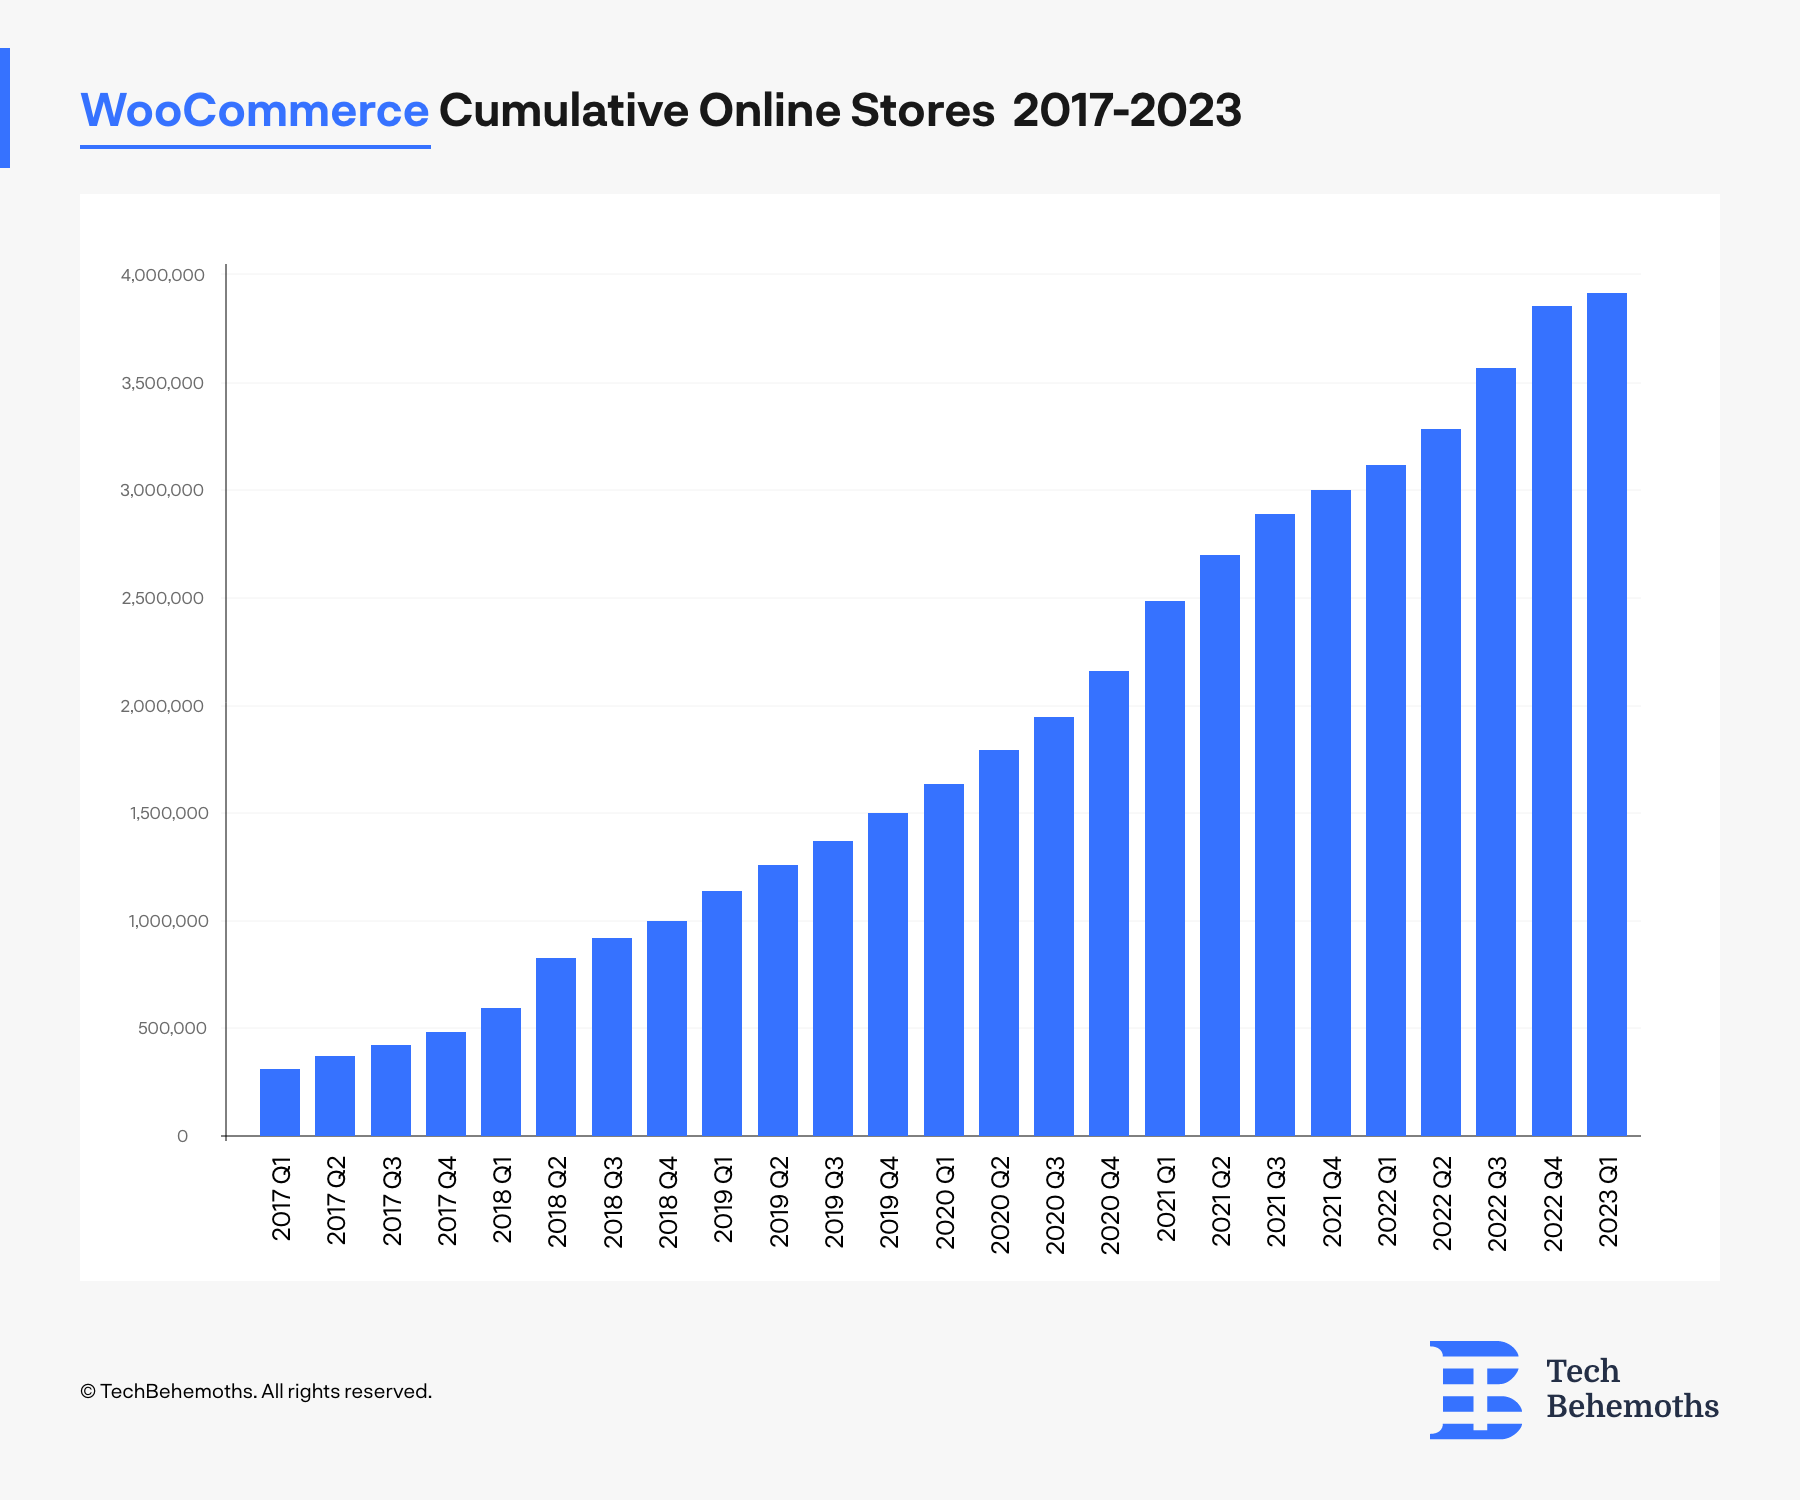 woocommerce cumulative stores on the web between 2017 - Q1 2023